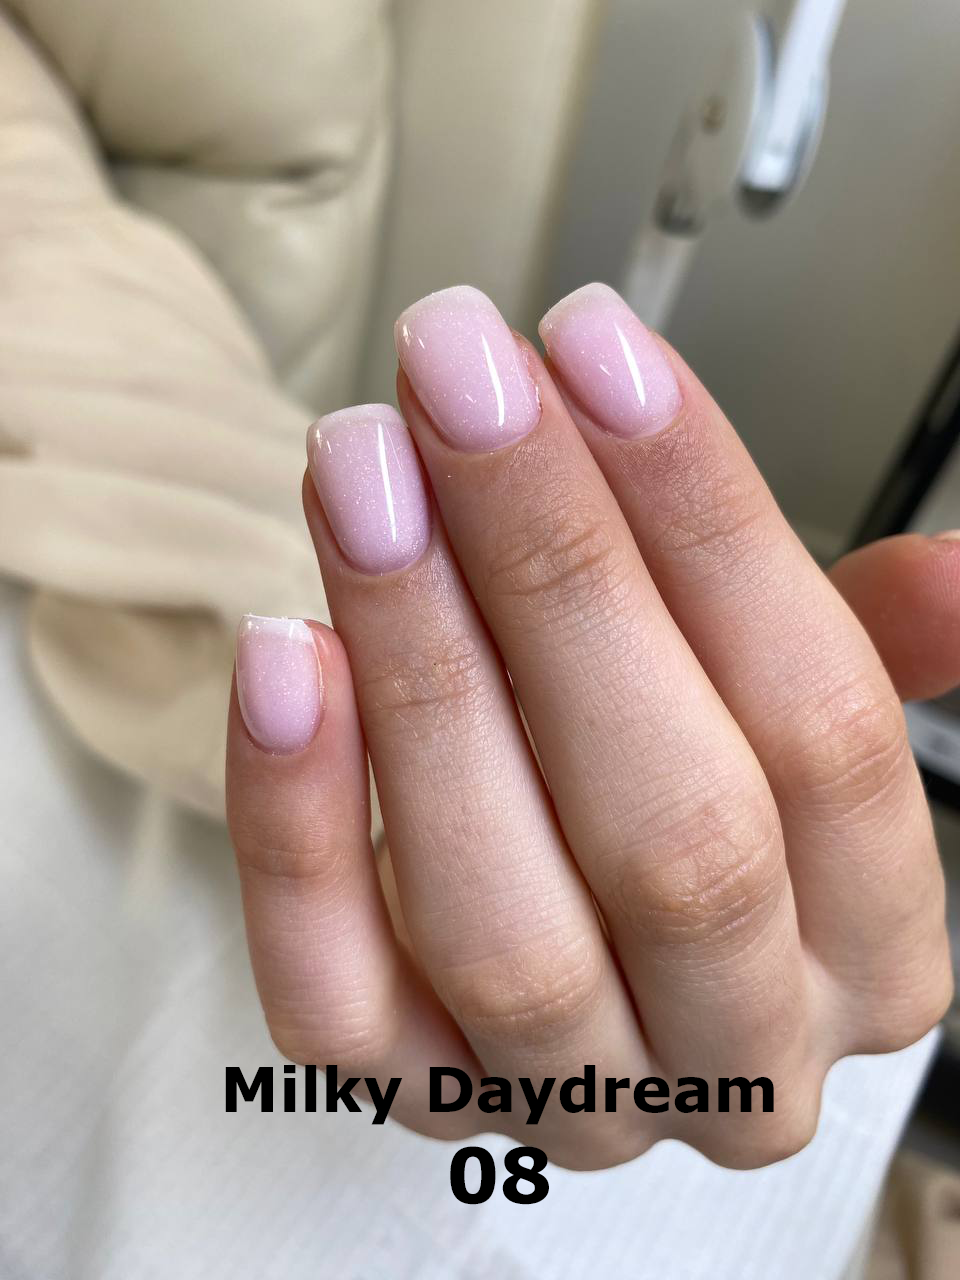 NEW! Milky Daydream Rubber Bases